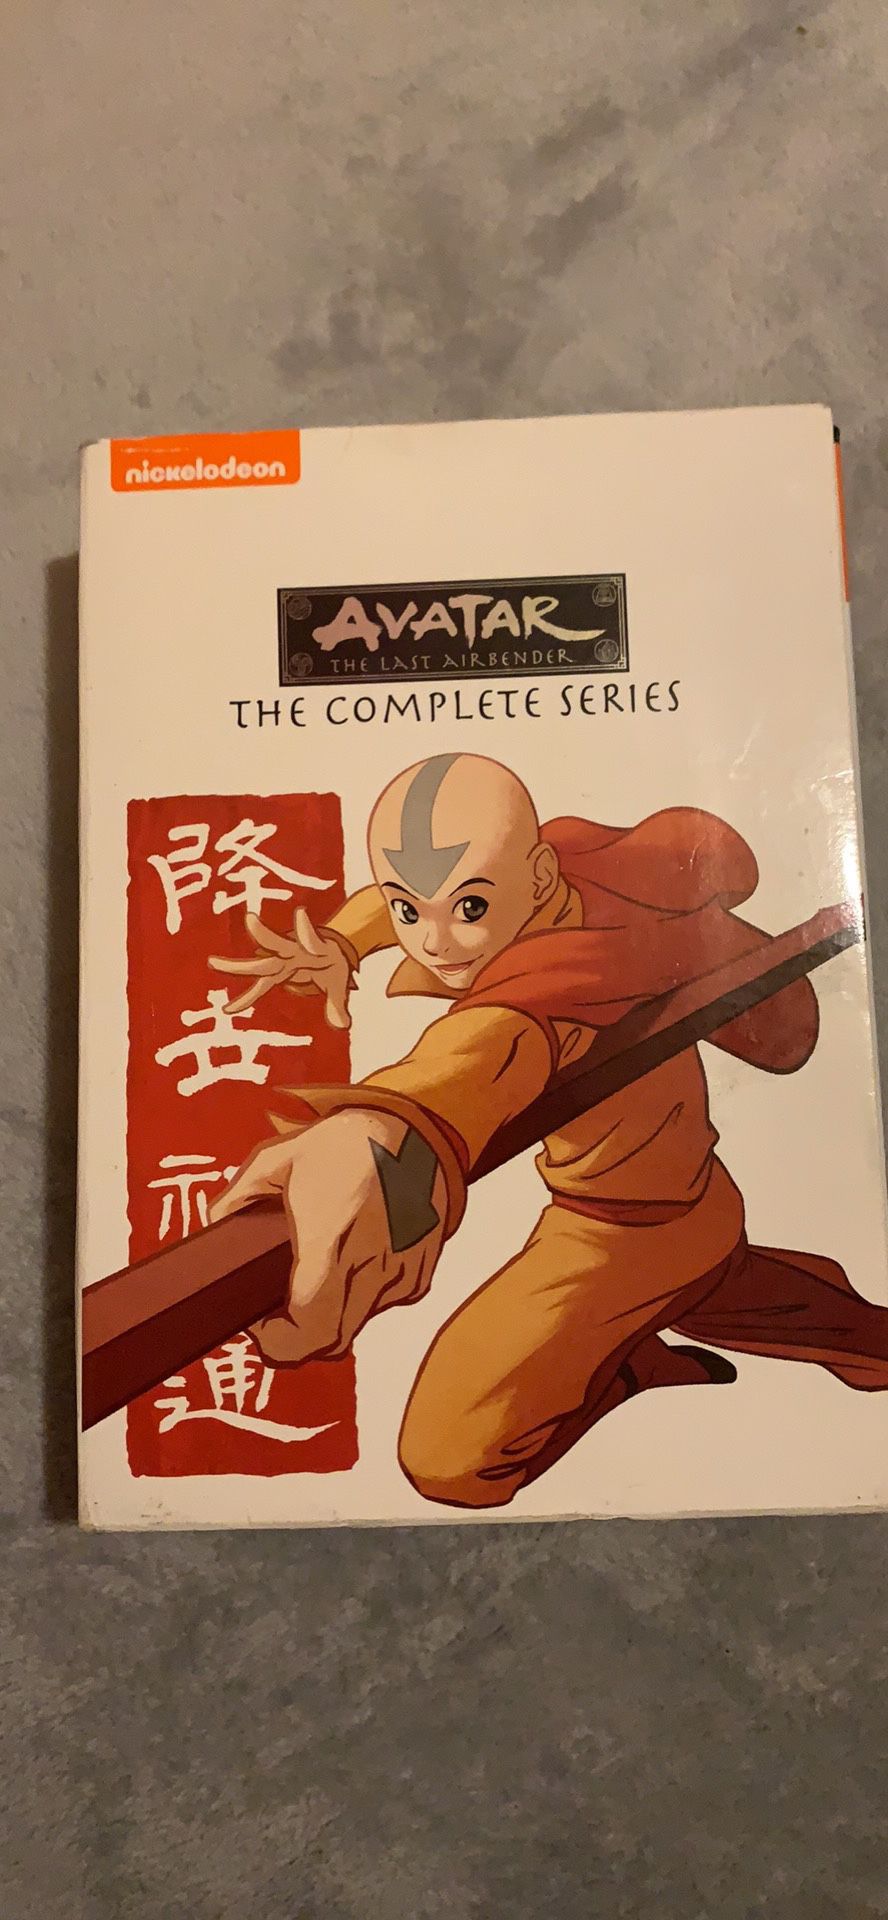 Avatar The Complete Series